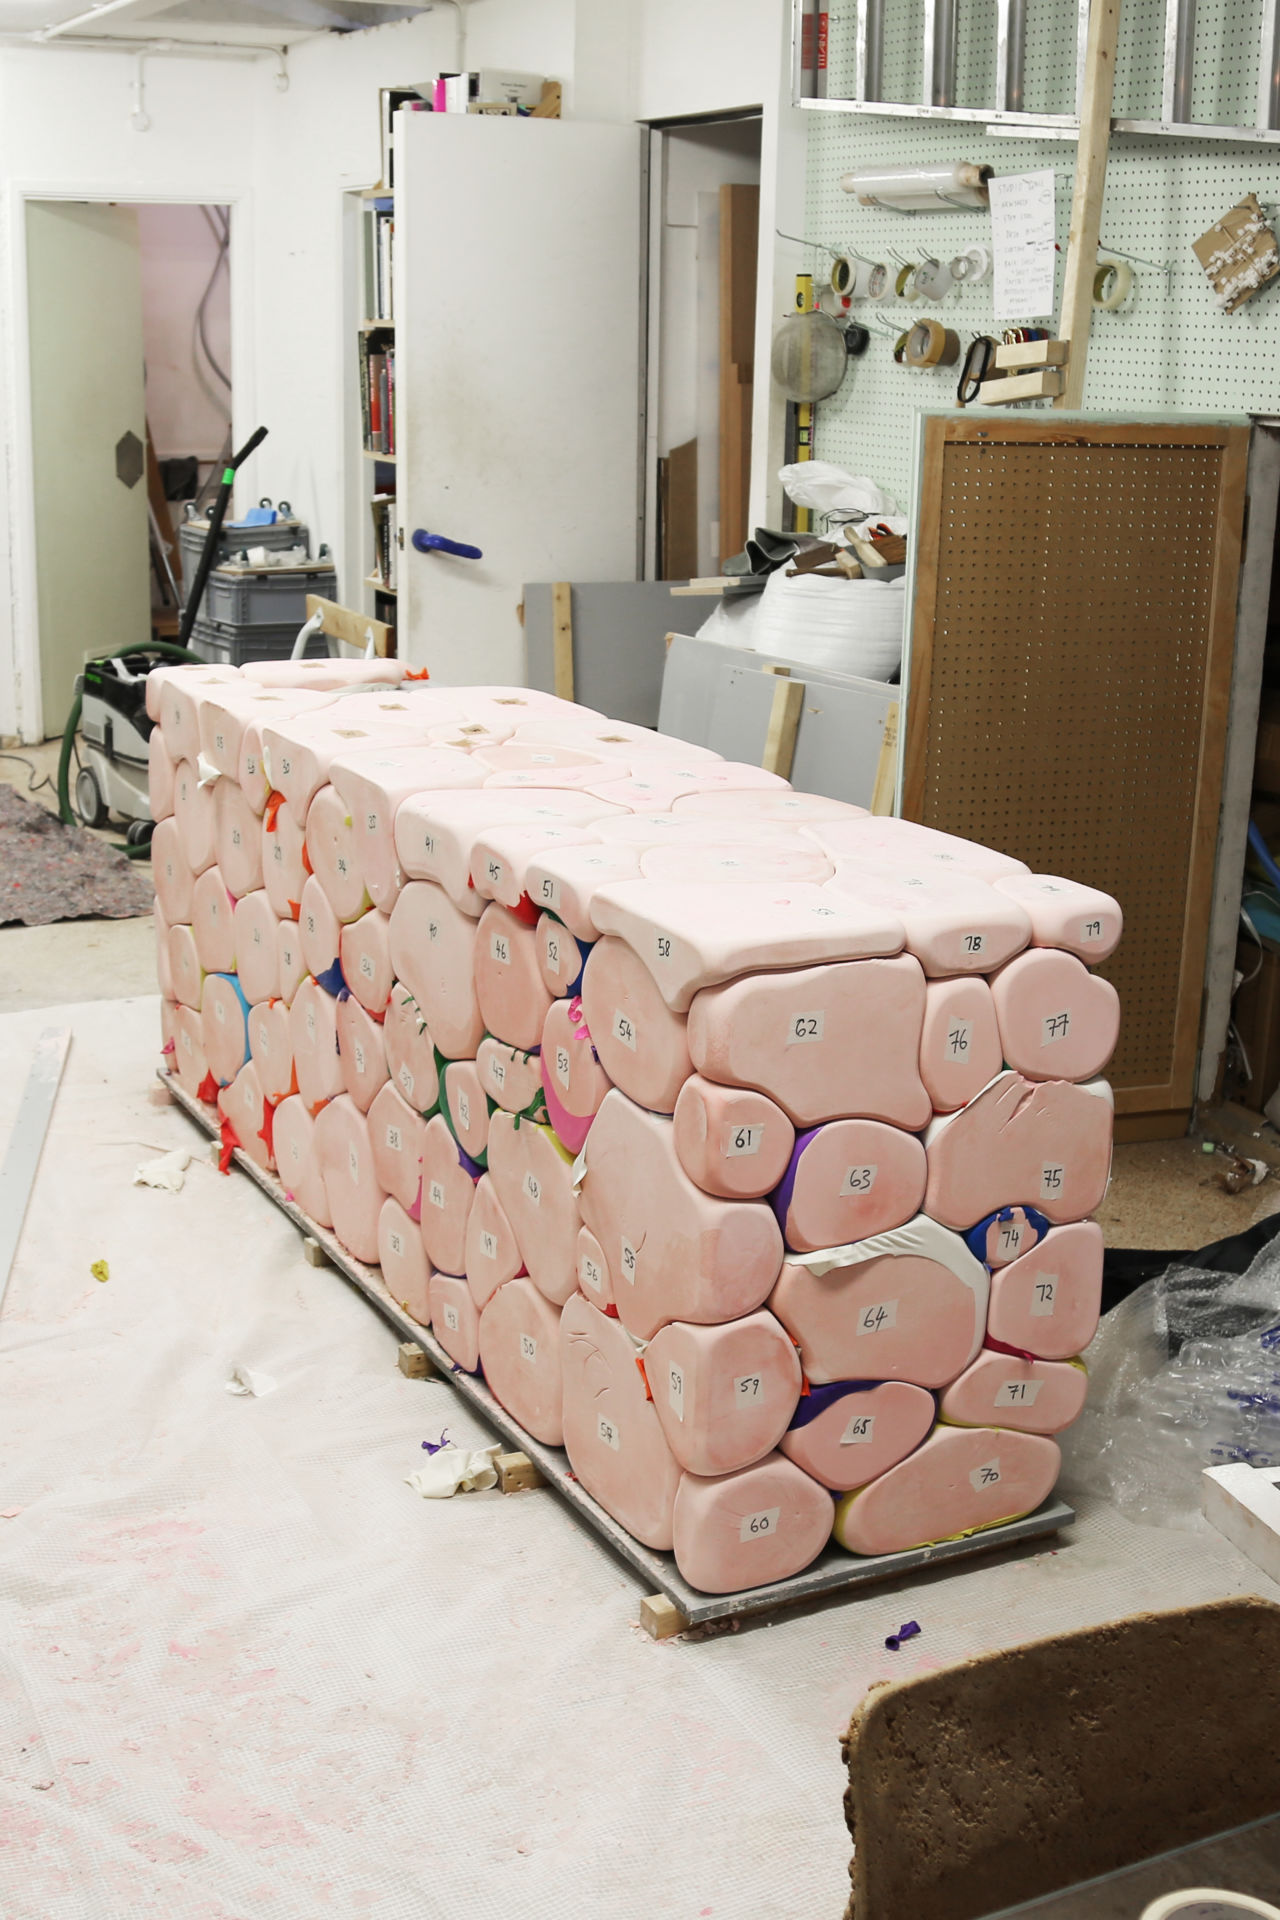 An editorial image from behind the scenes of building the Pink Counter for Hem's London pop-up shop, 2018.